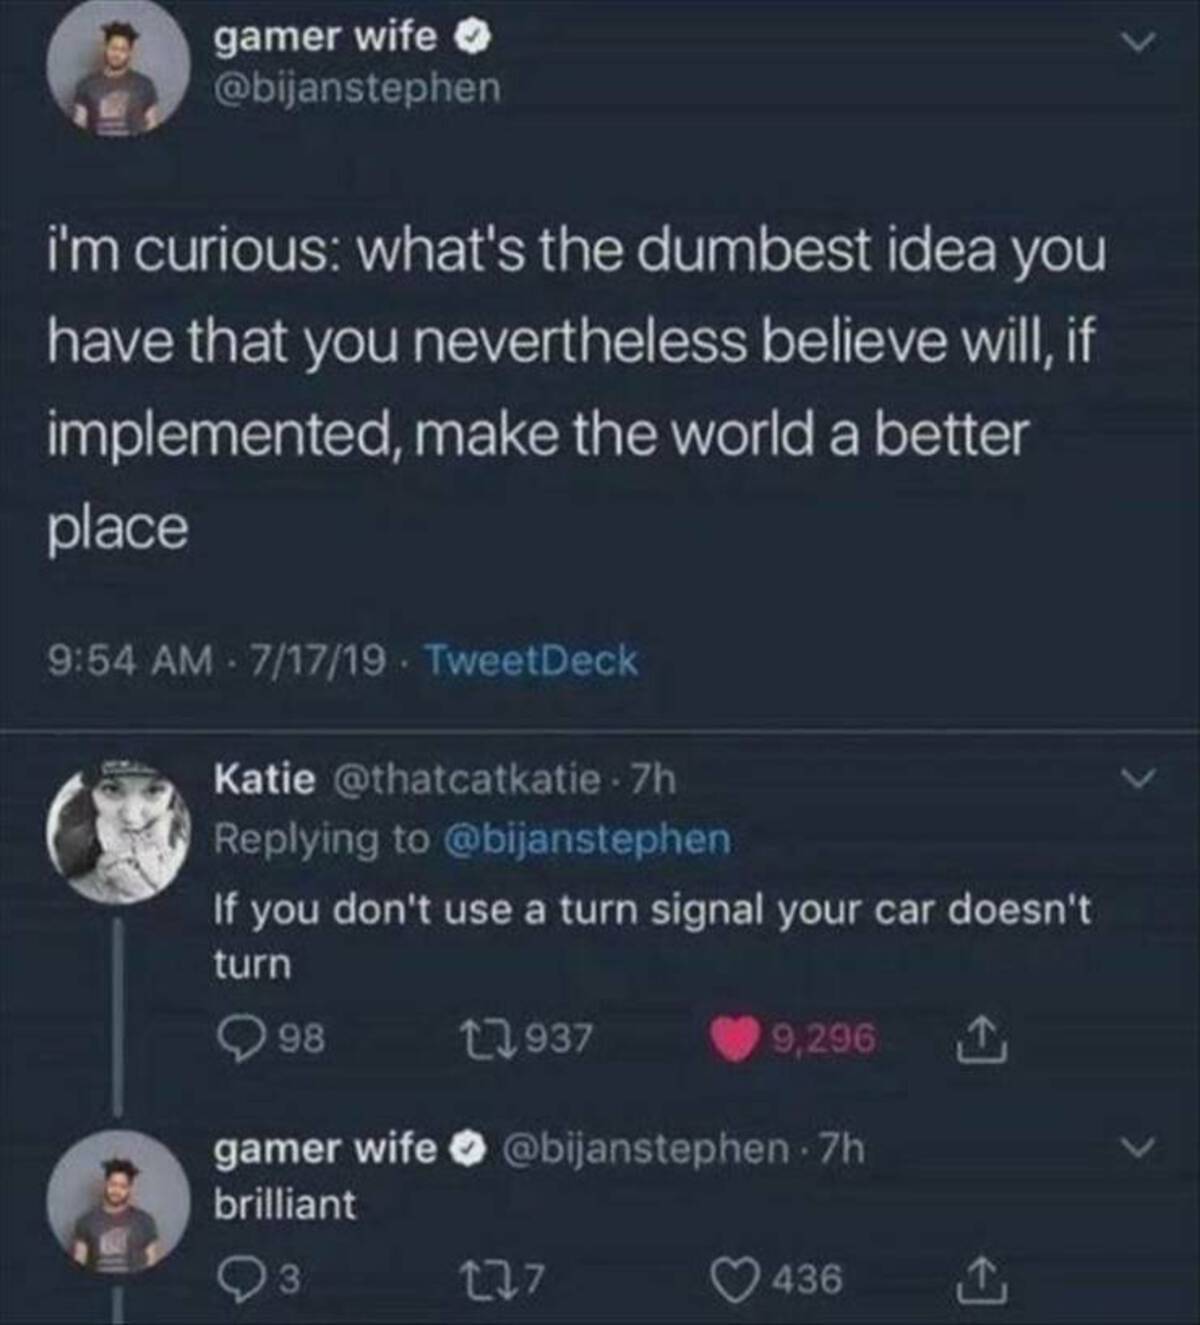 screenshot - gamer wife i'm curious what's the dumbest idea you have that you nevertheless believe will, if implemented, make the world a better place 71719. TweetDeck Katie 7h If you don't use a turn signal your car doesn't turn 98 1937 9,296 gamer wife 